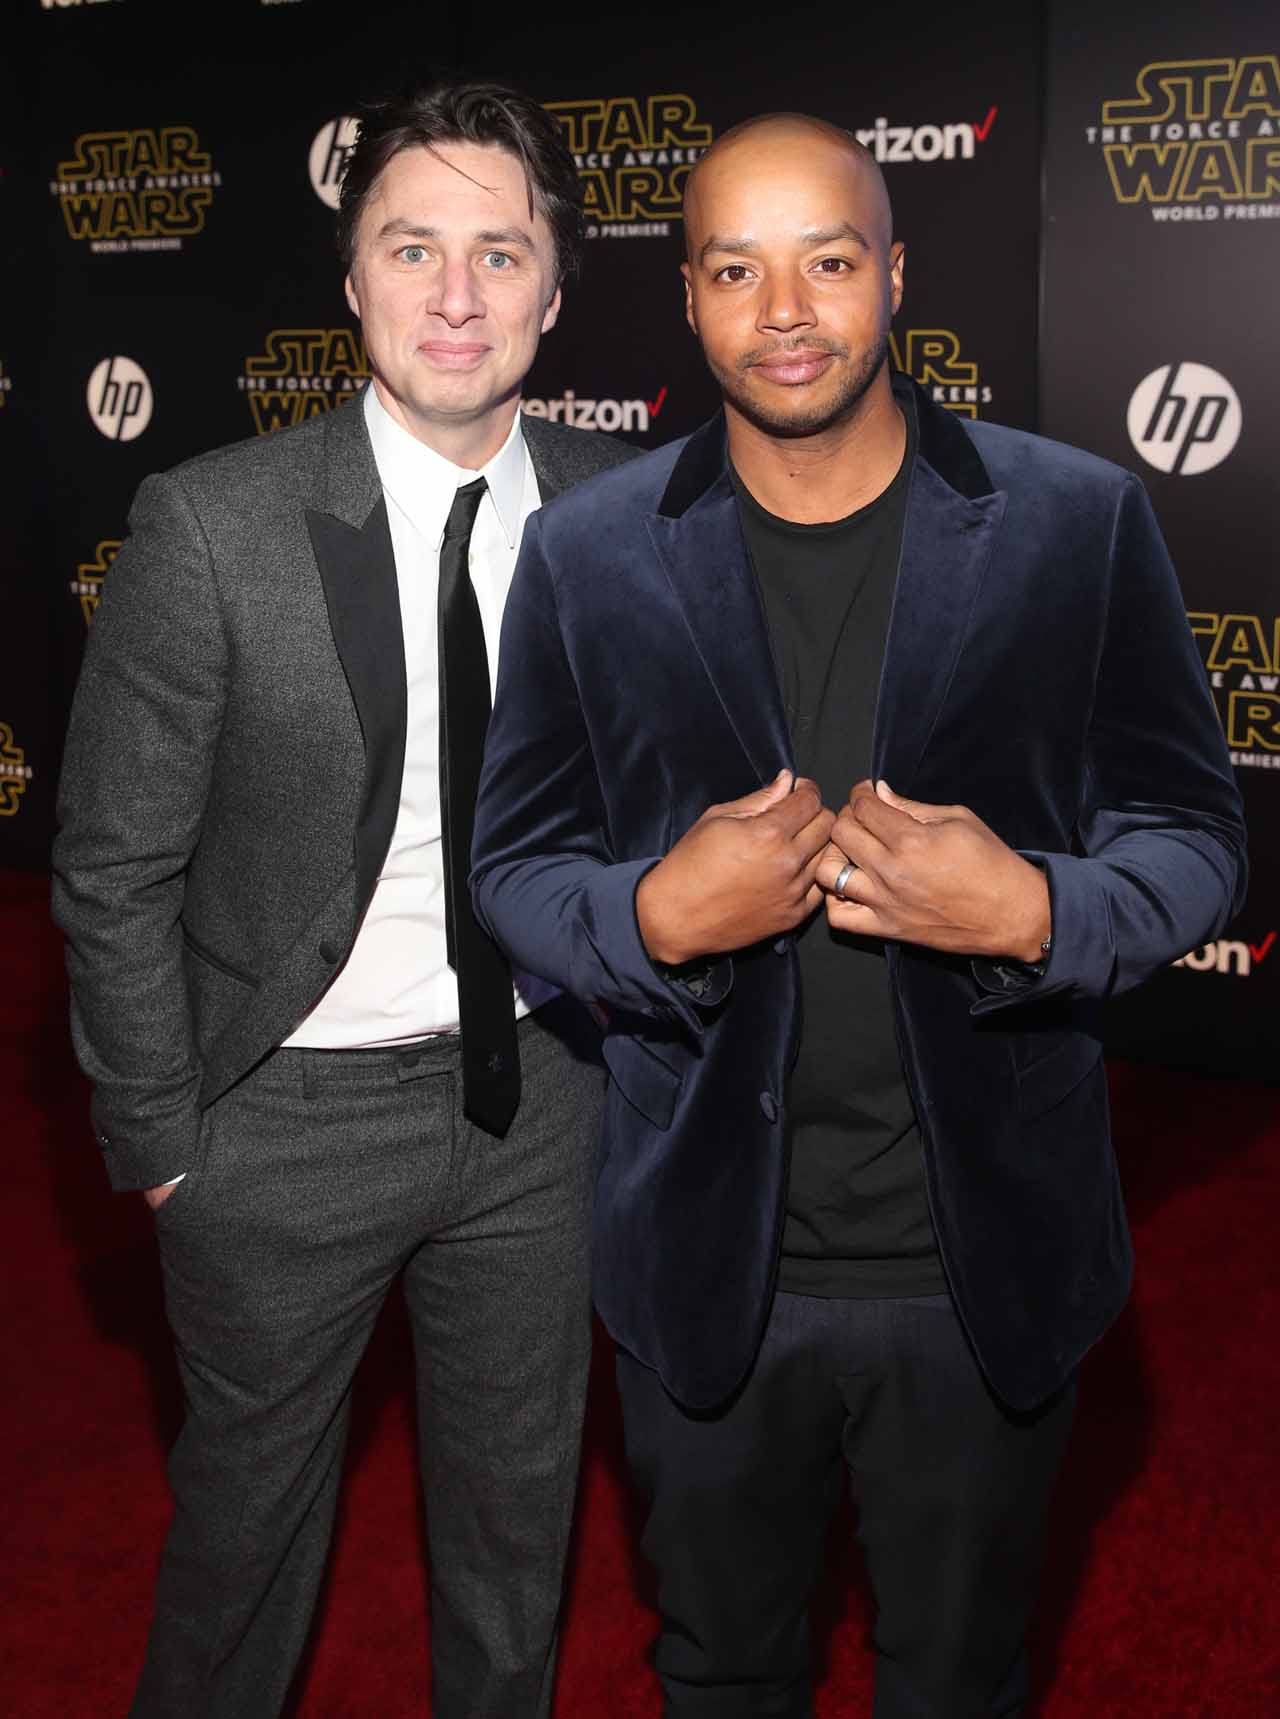 HOLLYWOOD, CA - DECEMBER 14:  Actors Zach Braff (L) and Donald Faison attend the World Premiere of ?Star Wars: The Force Awakens? at the Dolby, El Capitan, and TCL Theatres on December 14, 2015 in Hollywood, California.  (Photo by Jesse Grant/Getty Images for Disney) *** Local Caption *** Zach Braff;Donald Faison